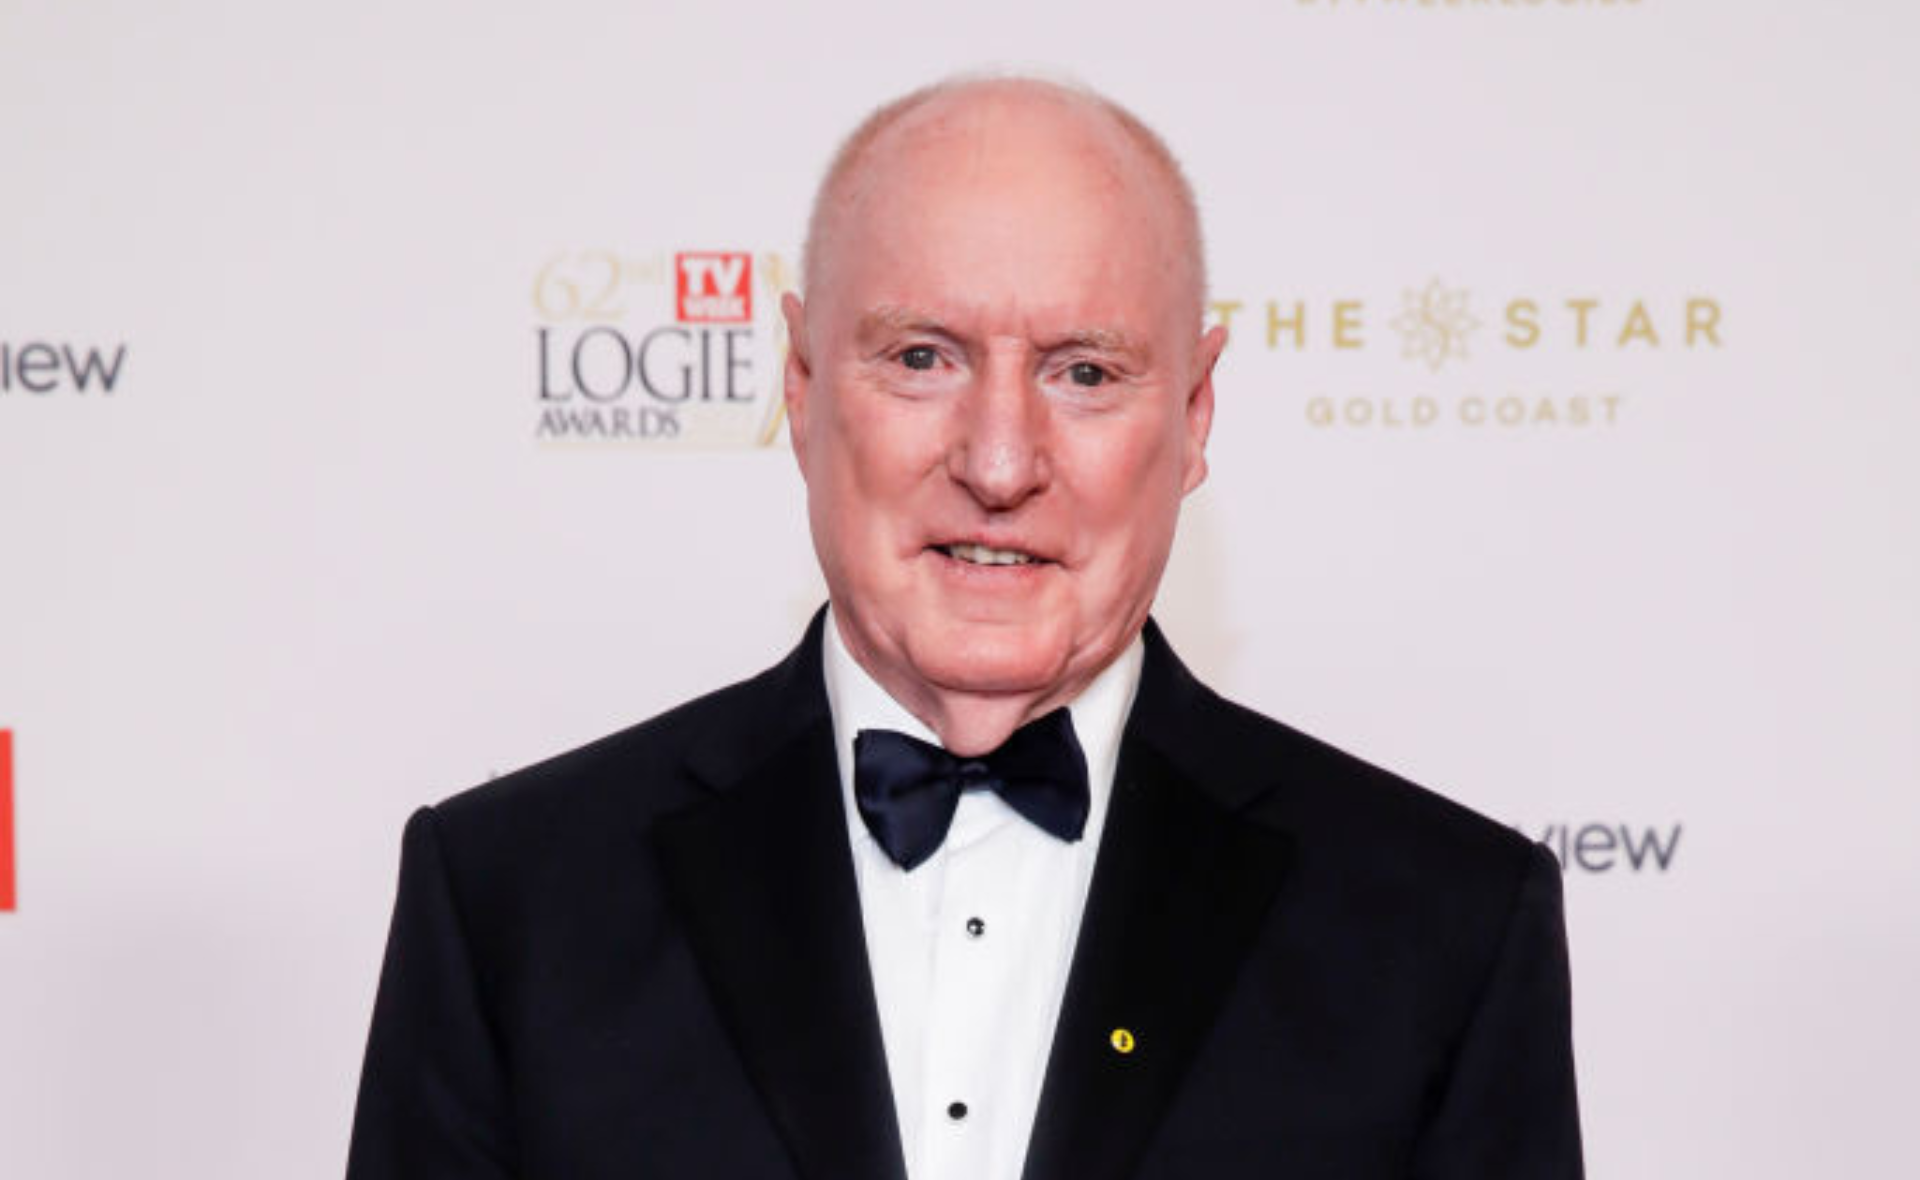 ”It is a tough industry”: Home and Away star Ray Meagher reveals major career move